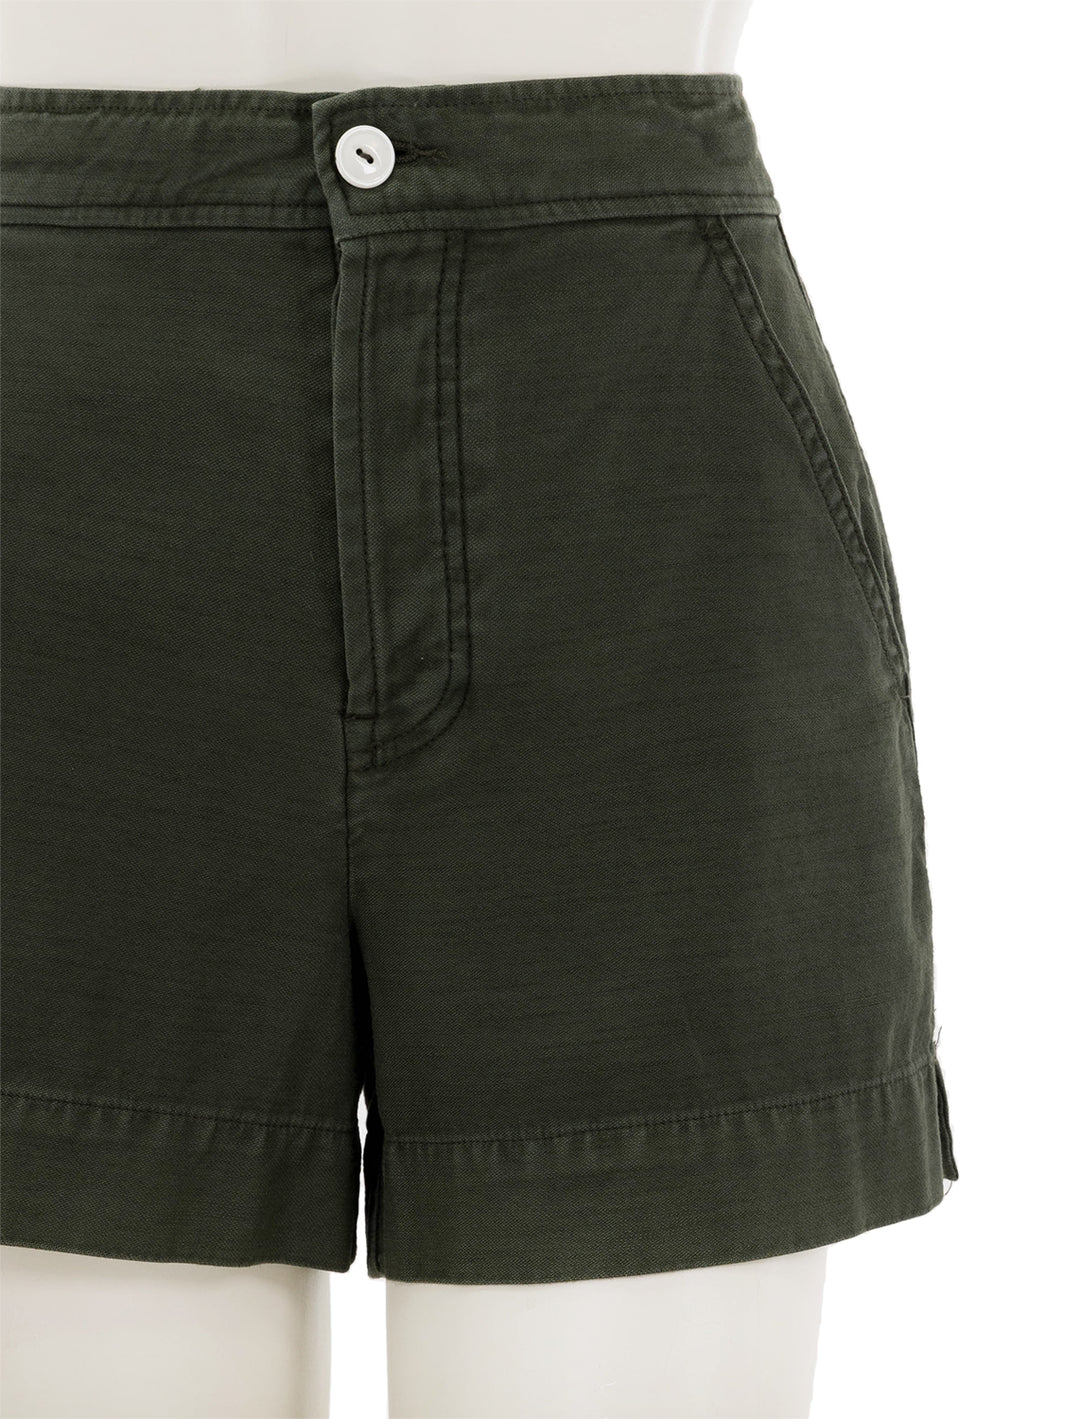 Close-up view of Alex Mill's alessandra pull-on shorts in pine needle.